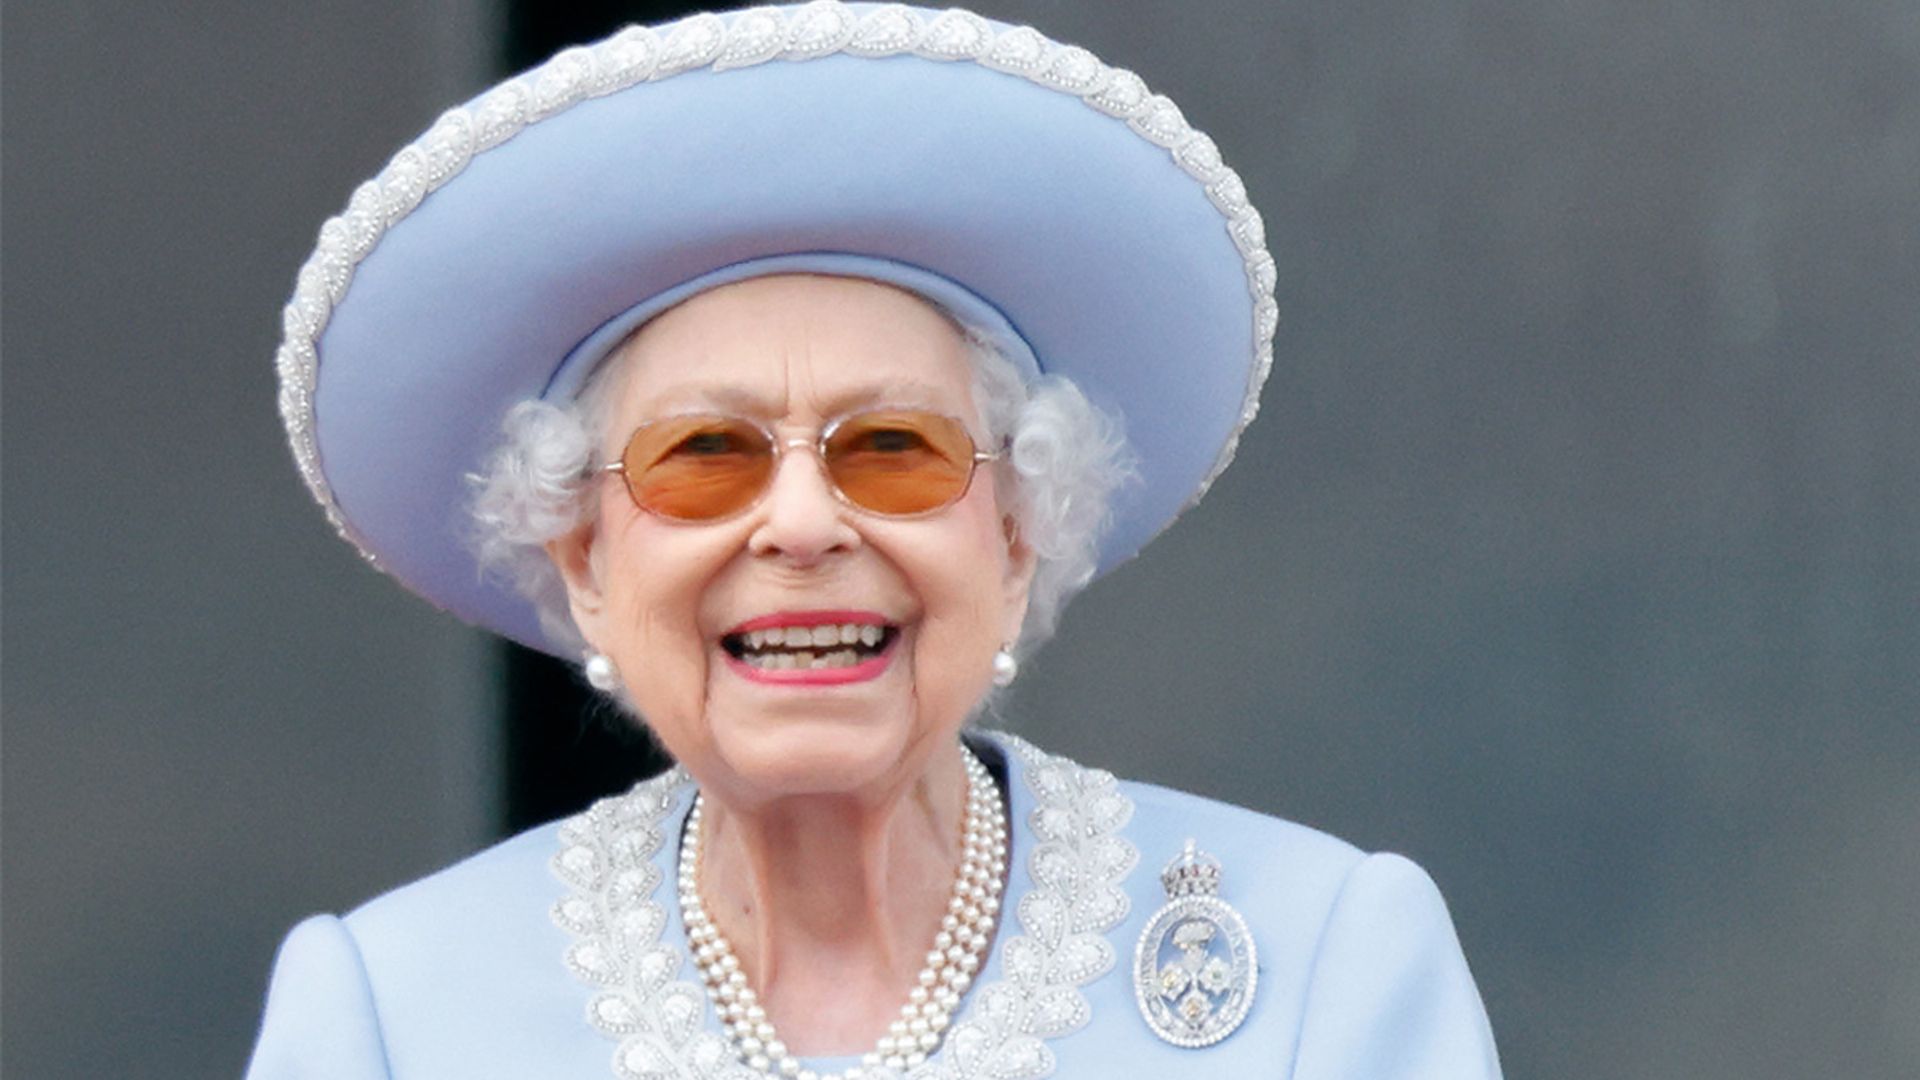 The Queen and royal family celebrate historic occasion - details | HELLO!